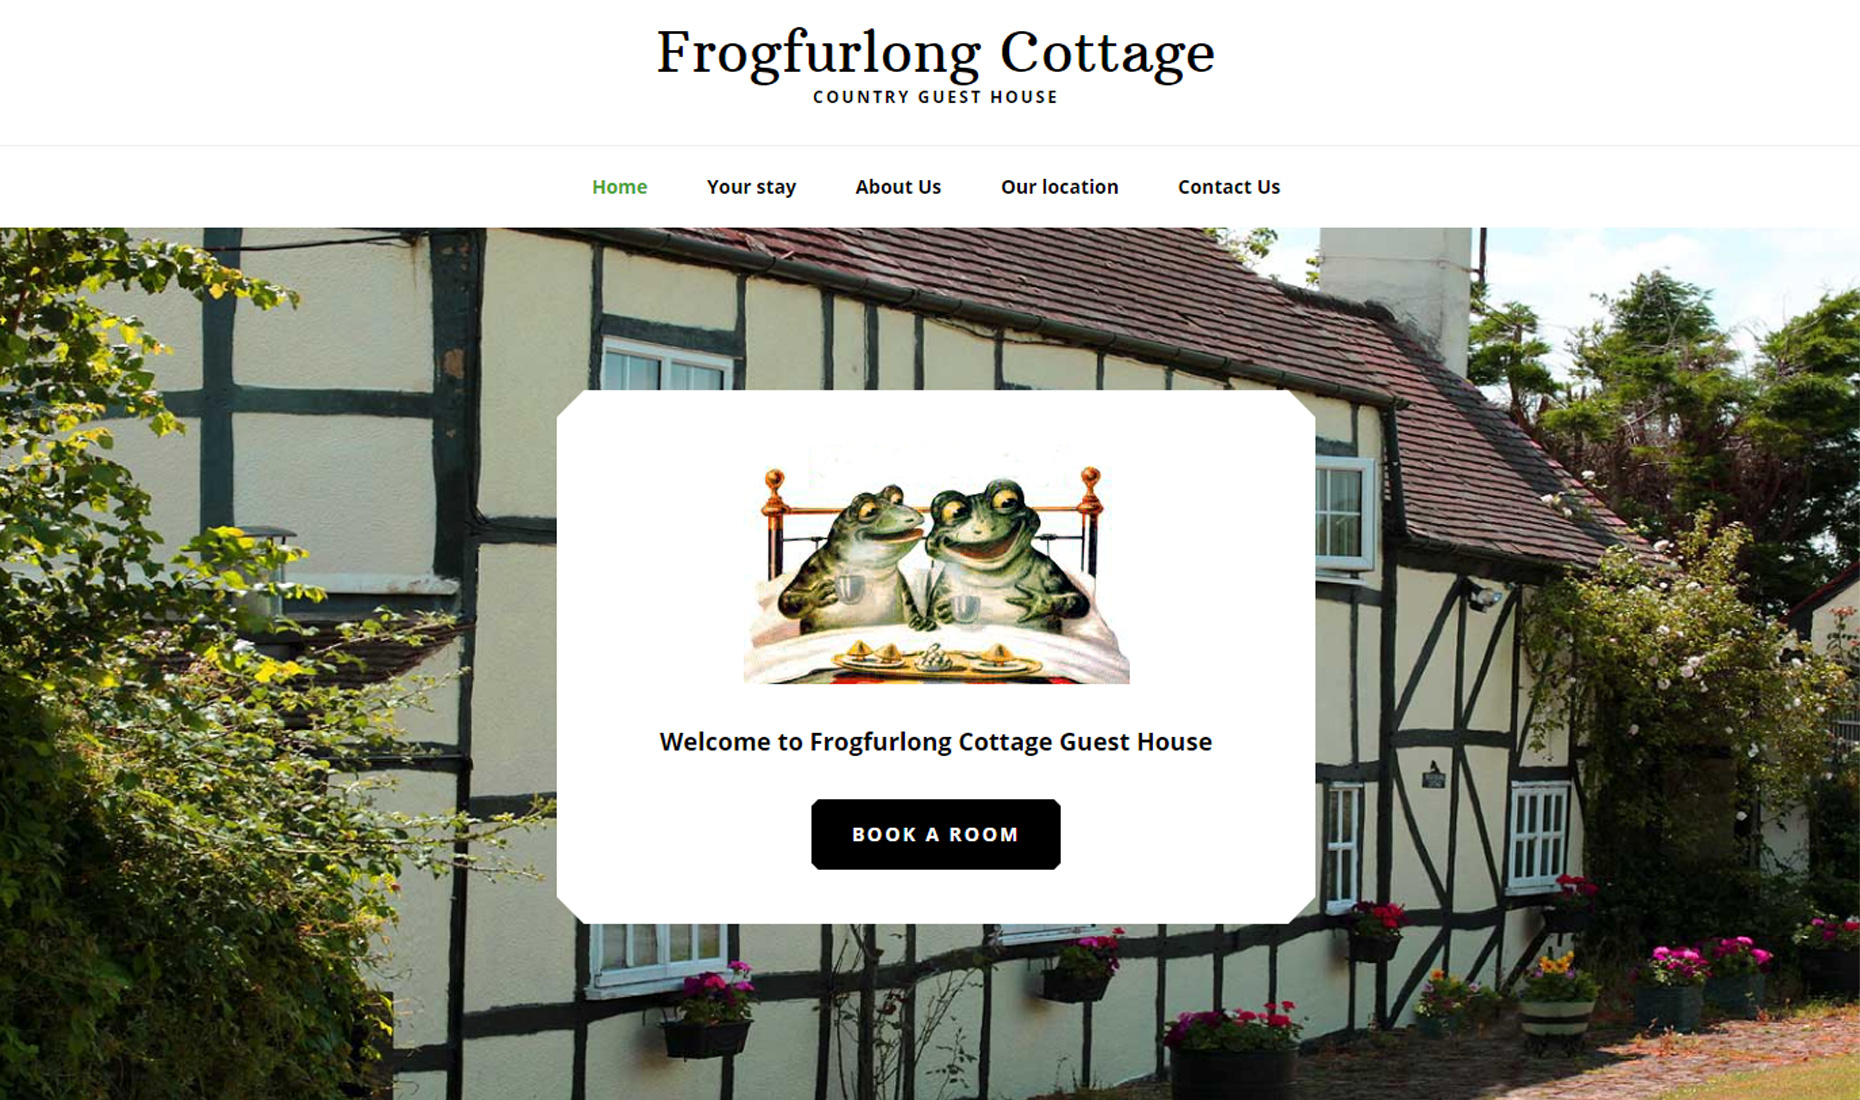 Frogfurlong Cottage Country Guest House